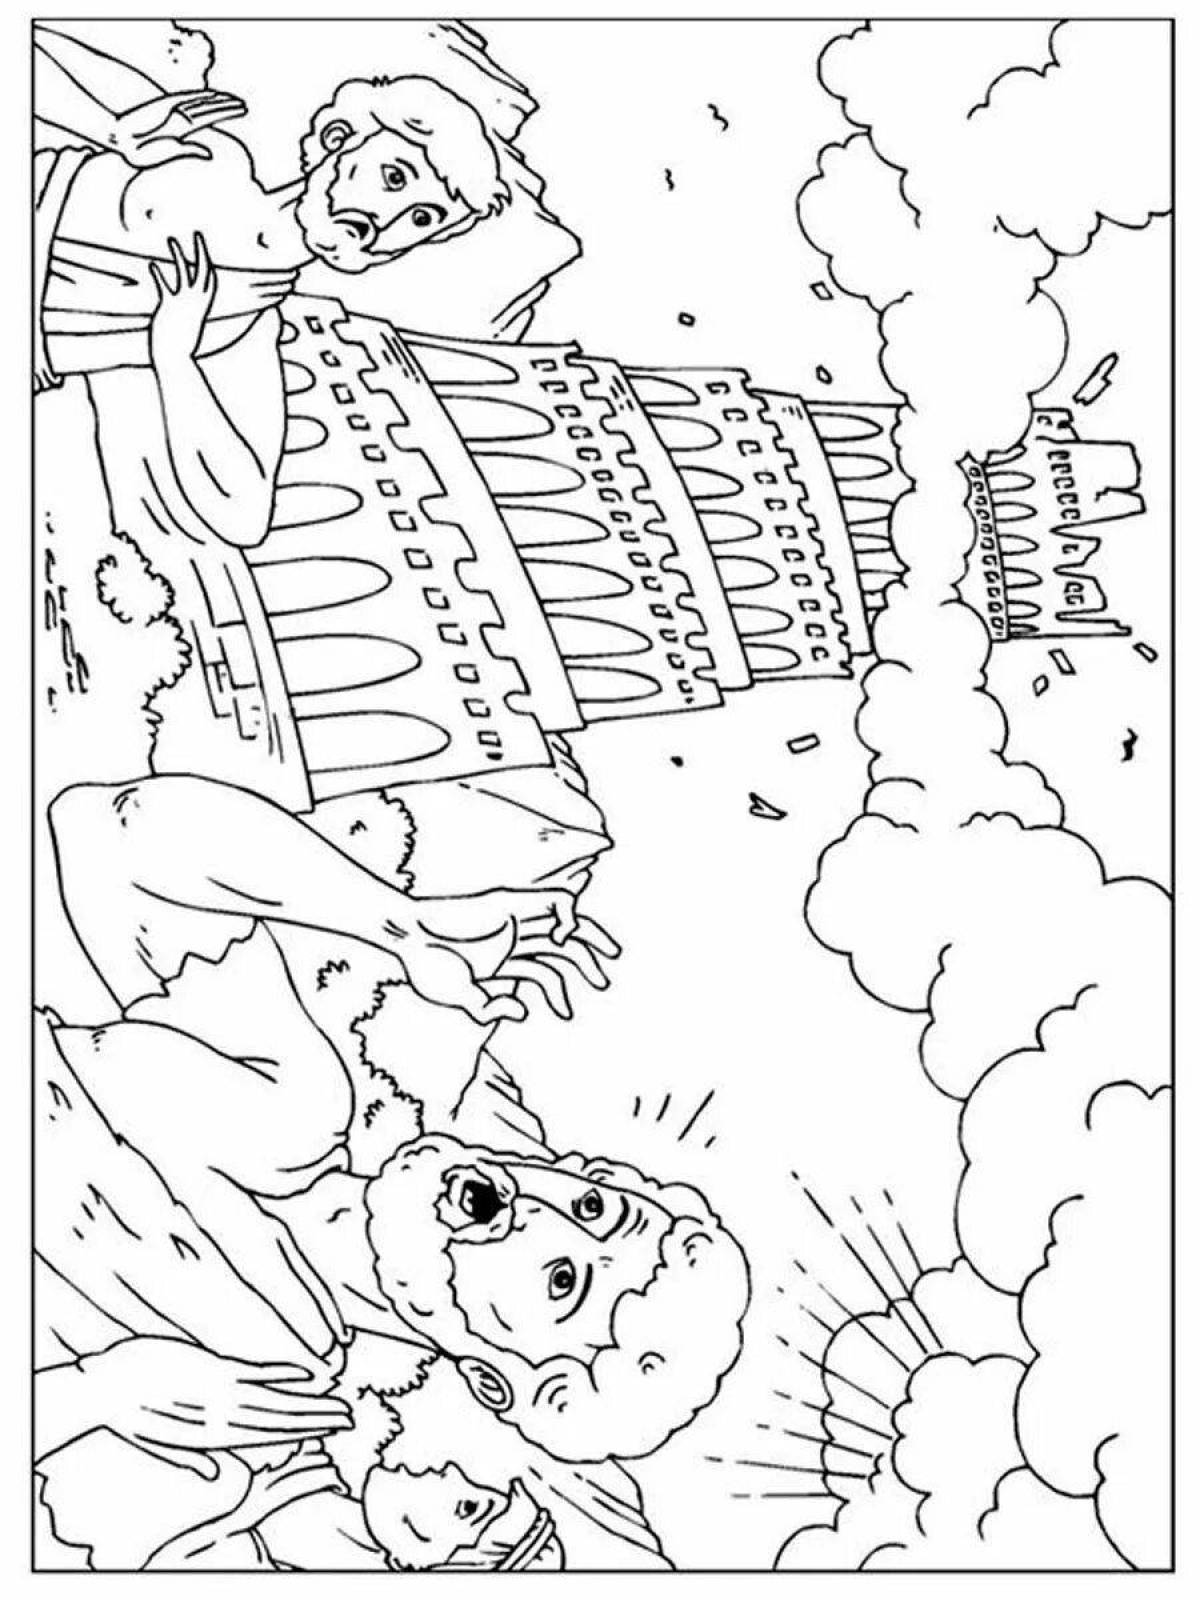 Radiantly coloring page tower of babel